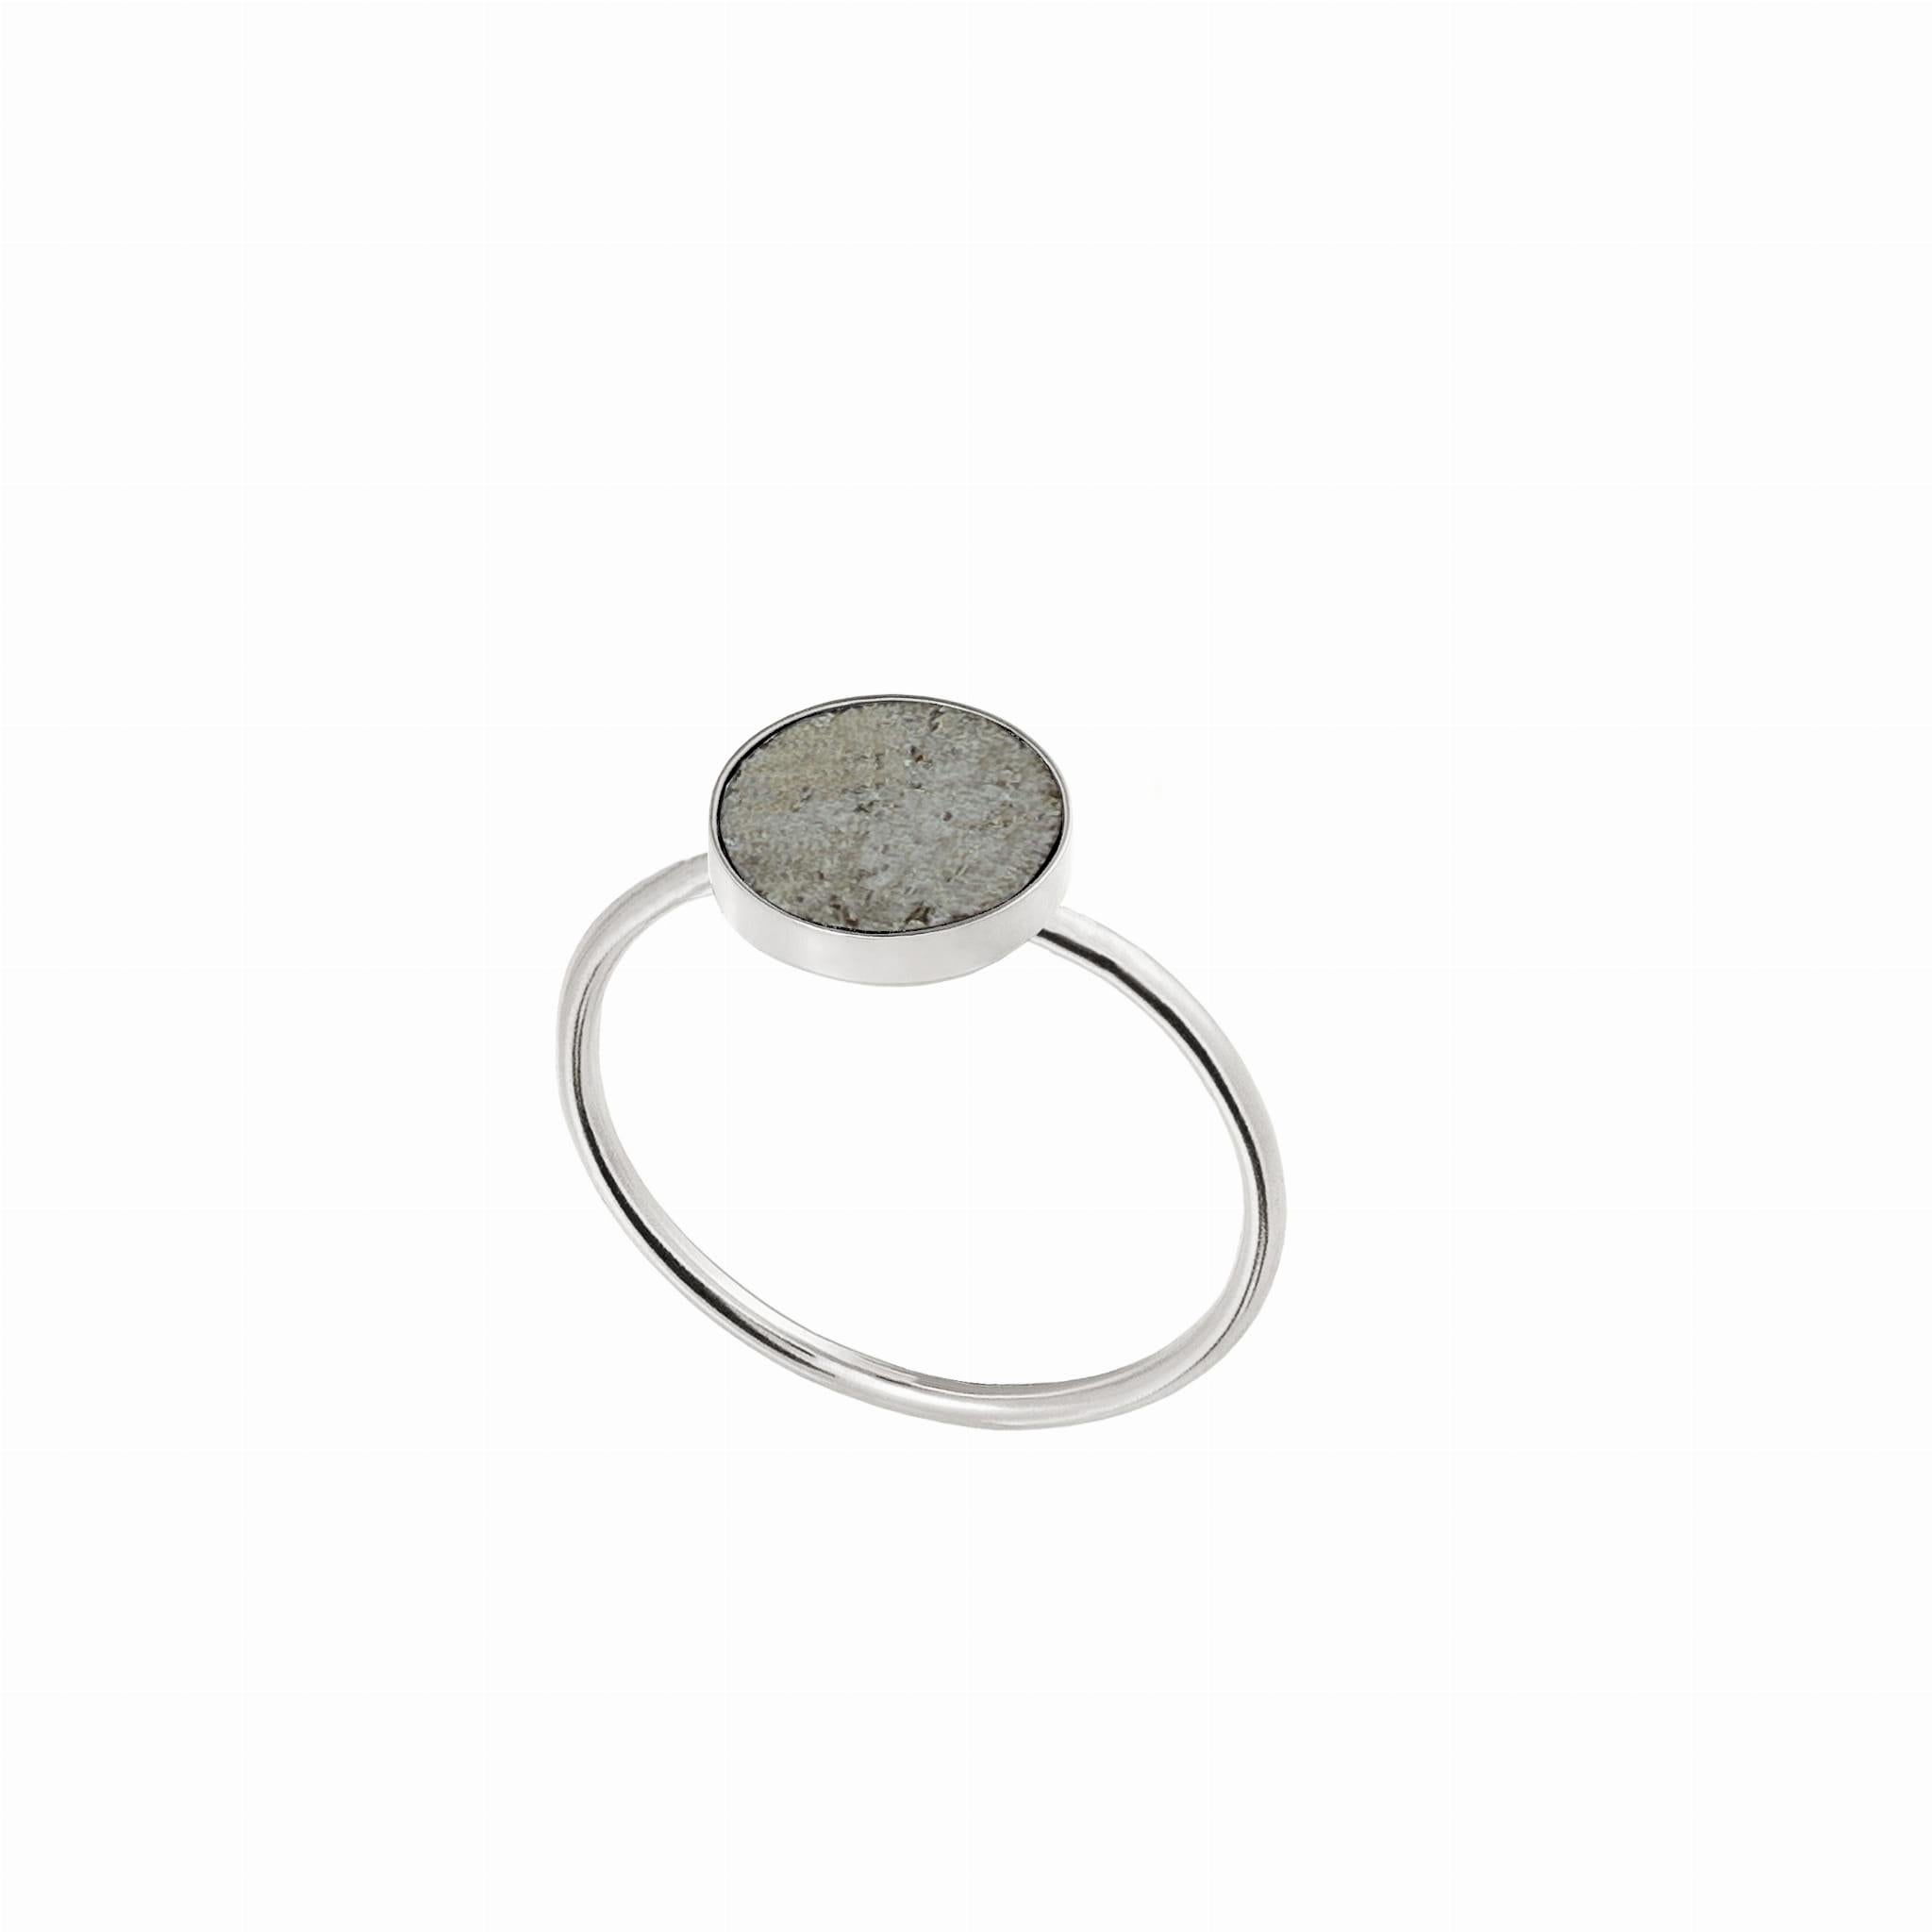 Have you ever dreamt of a star from the sky? Now you can get it and enjoy its cosmic beauty.
This ring is literally out of this world. If you choose it as an engagement ring, you will make a perfect declaration of your infinite love. 

The meteorite